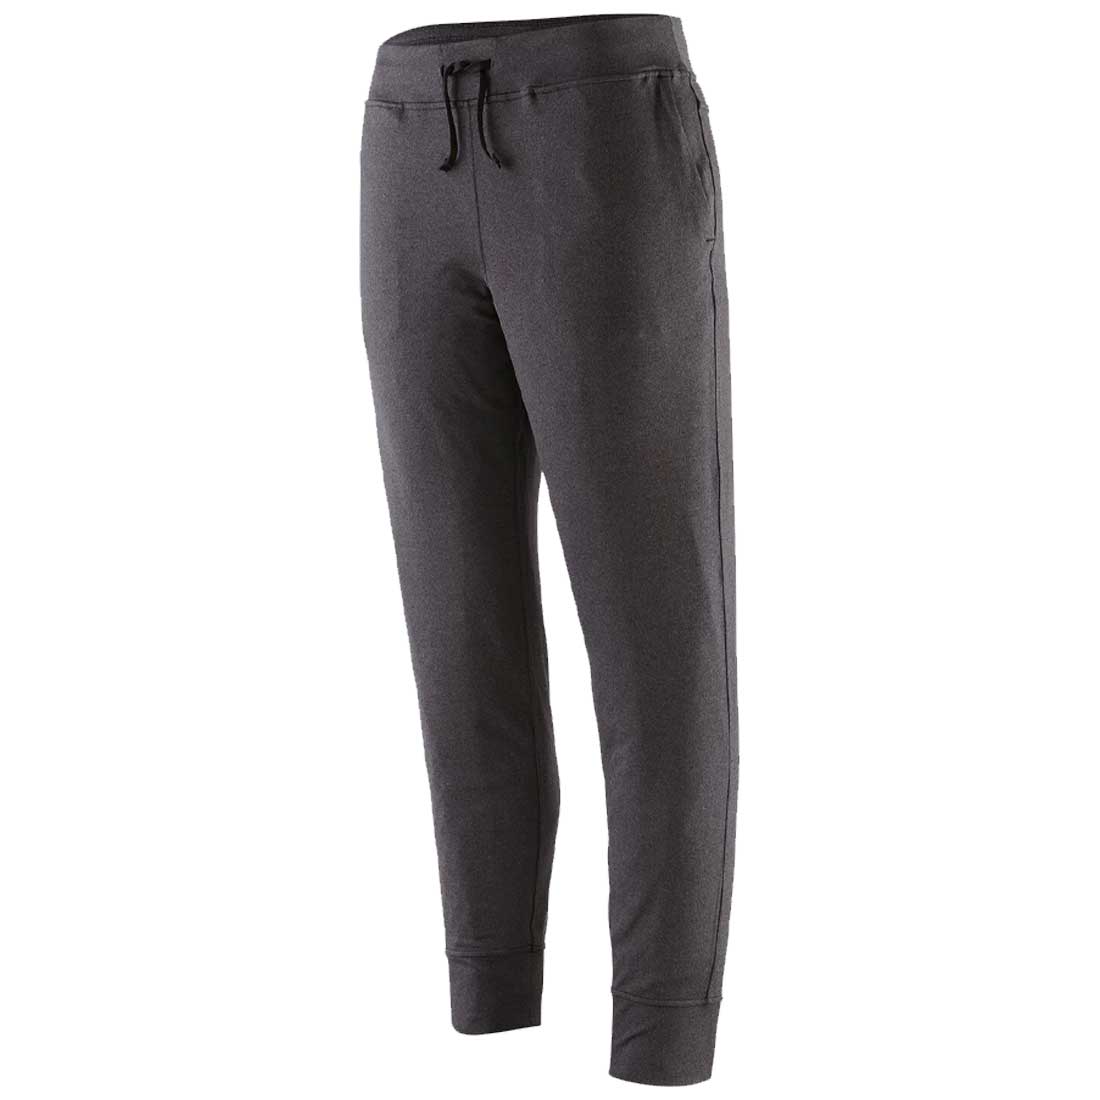 Patagonia Pack Out Jogger - Women's